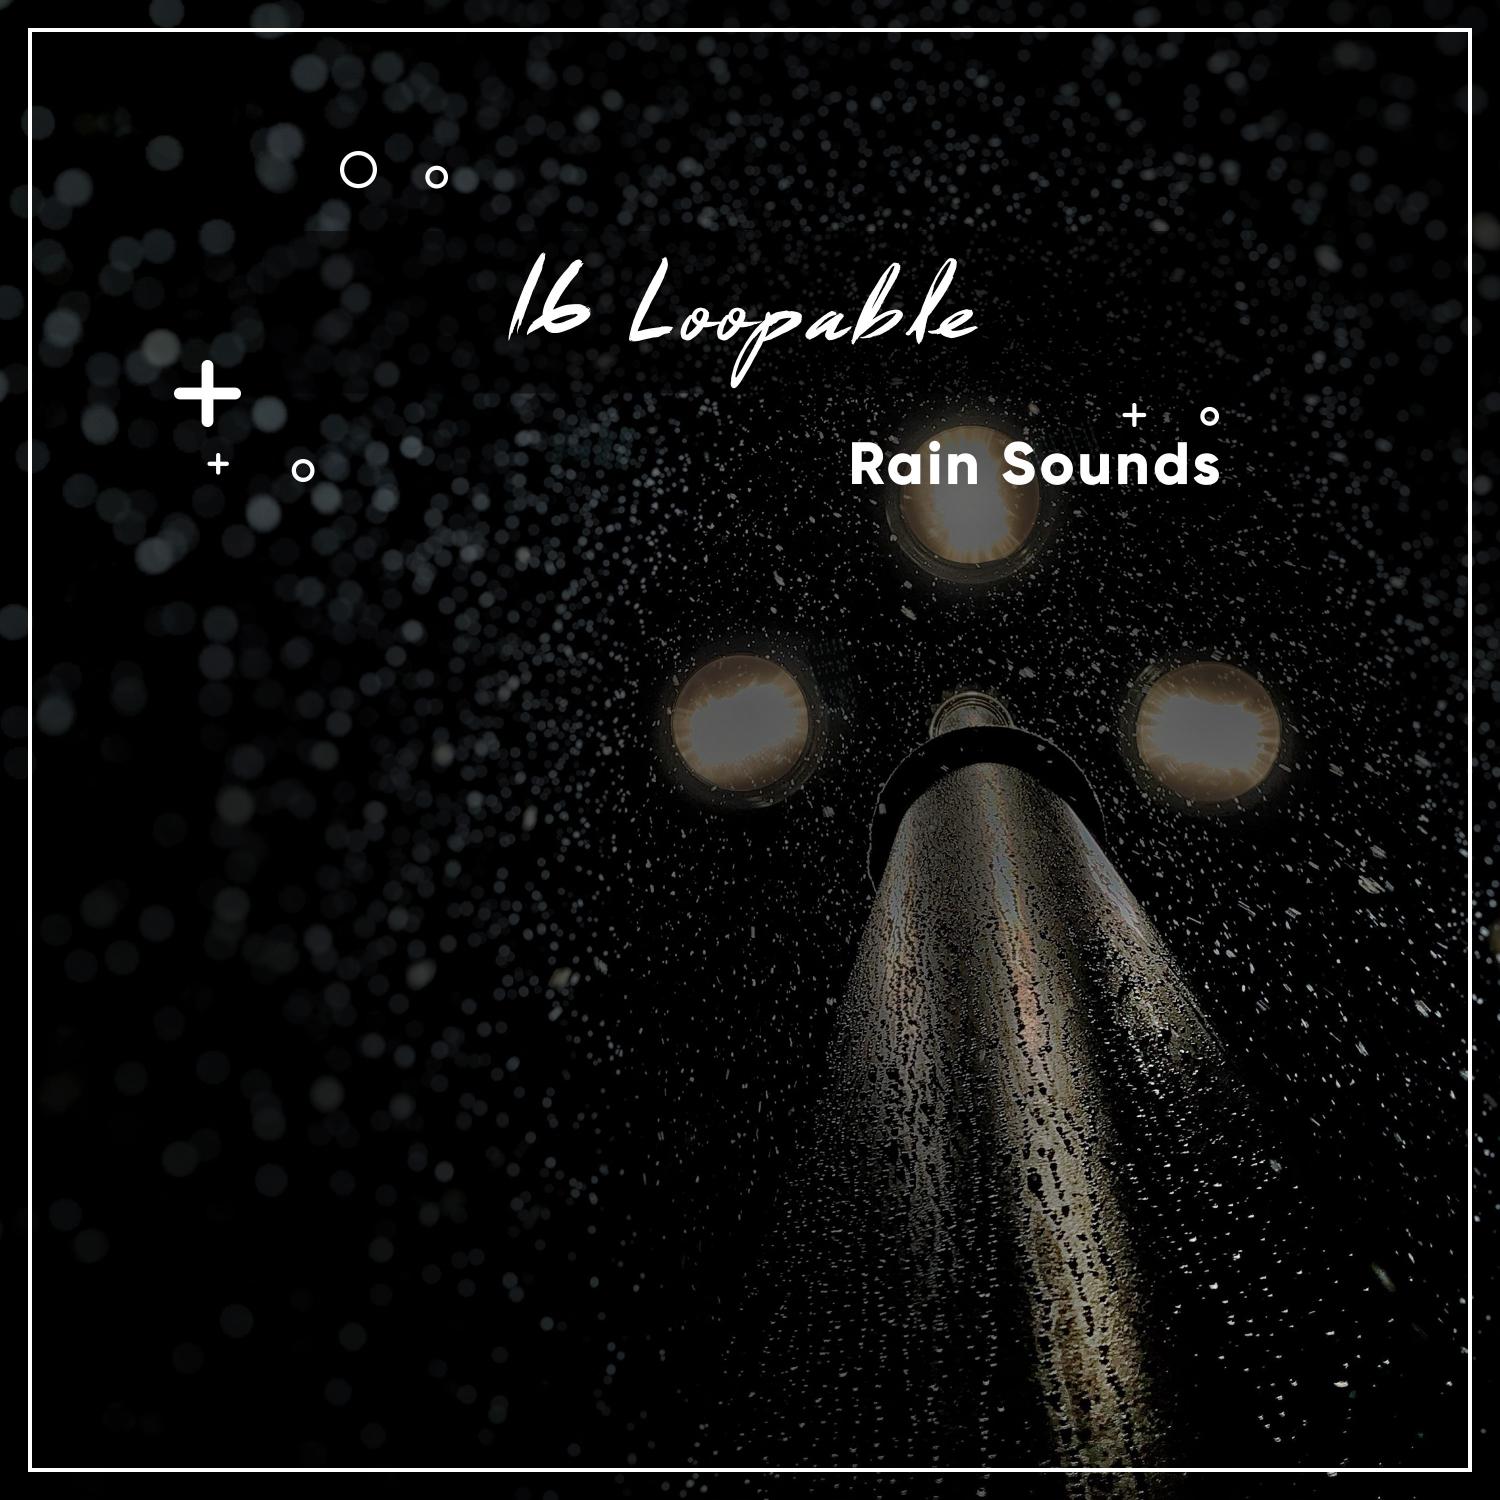 16 Loopable Rain, Nature and Thunderstorm Sounds